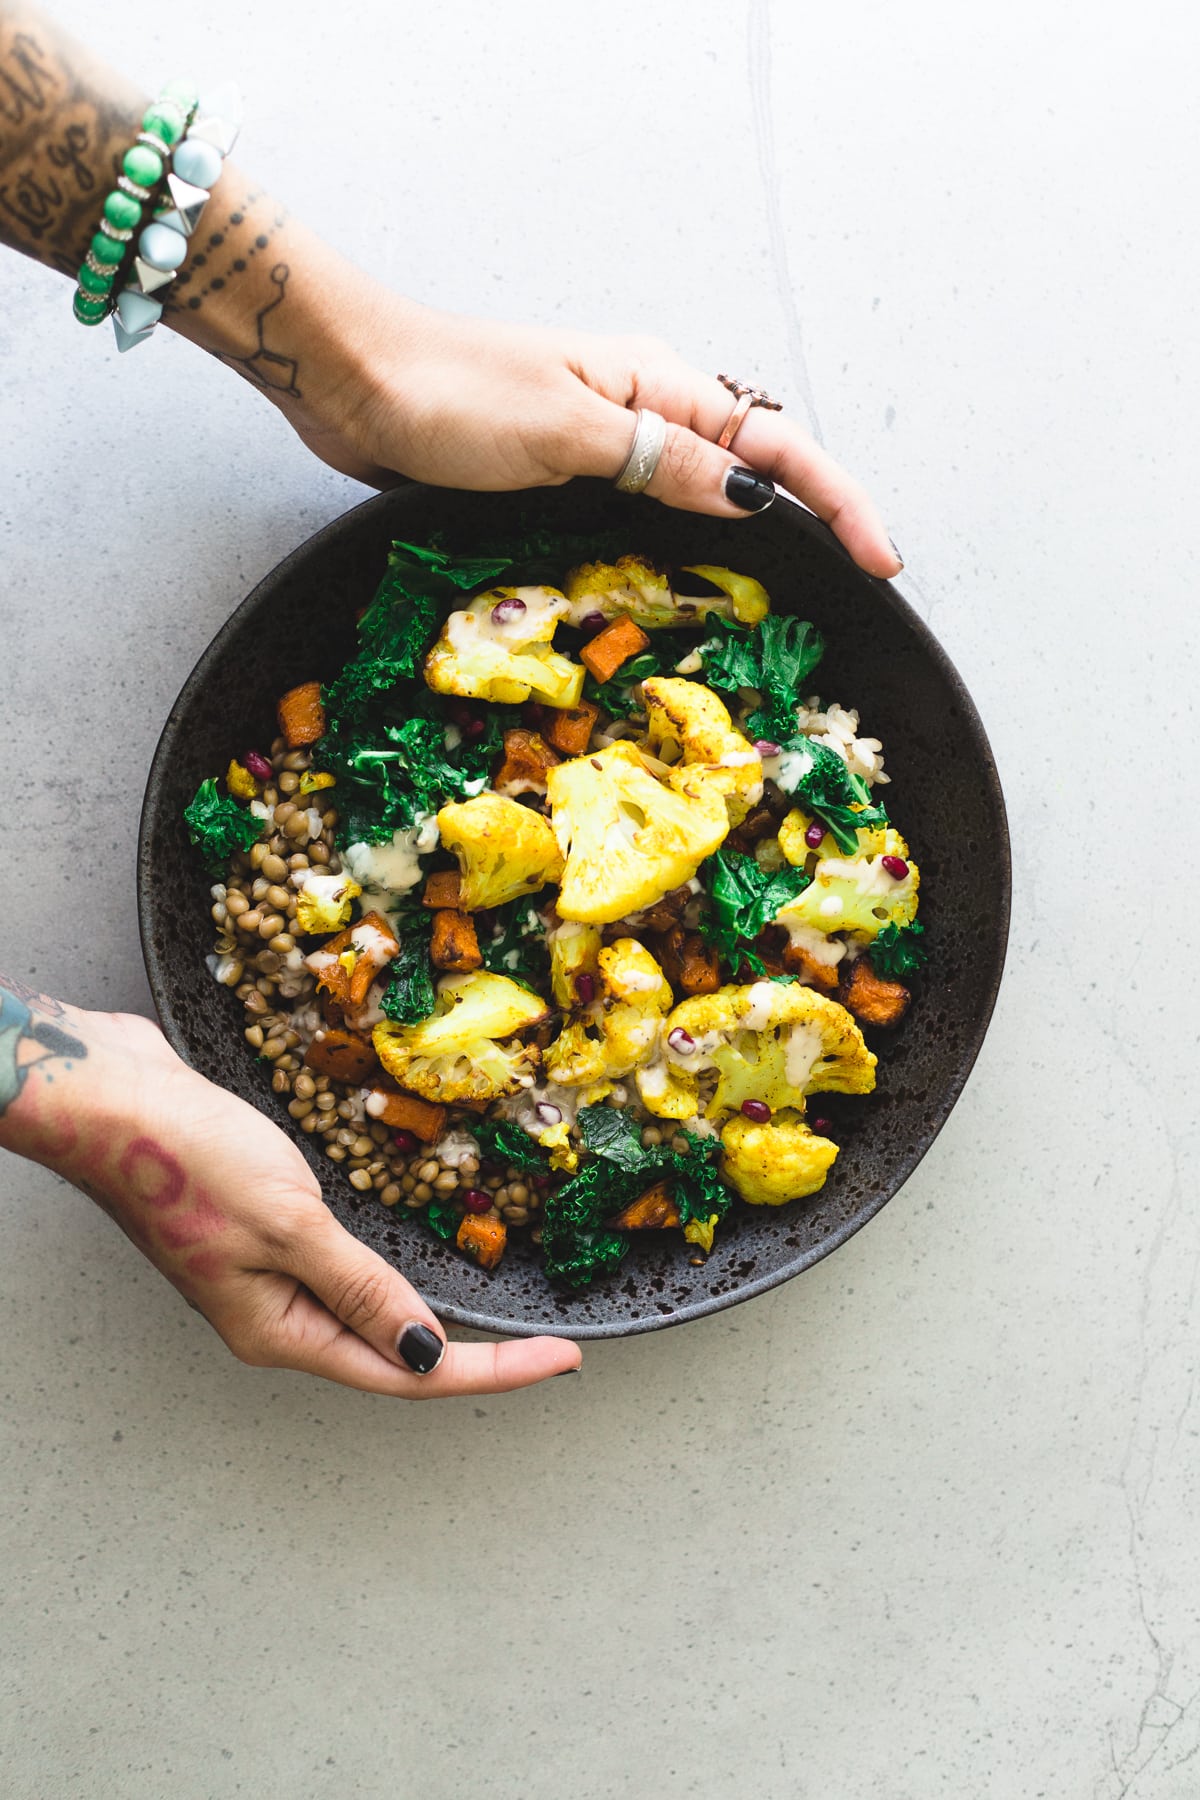 A delicious, protein packed Vegan Roasted Cauliflower and Brown Rice Salad with a creamy Tahini Garlic Dressing. Gluten Free, Fuss Free, YUM! #brownrice #lentil #salad #veganrecipes #simplerecipes #cauliflower #turmeric #roasted #sweetpotato #kale #delicious